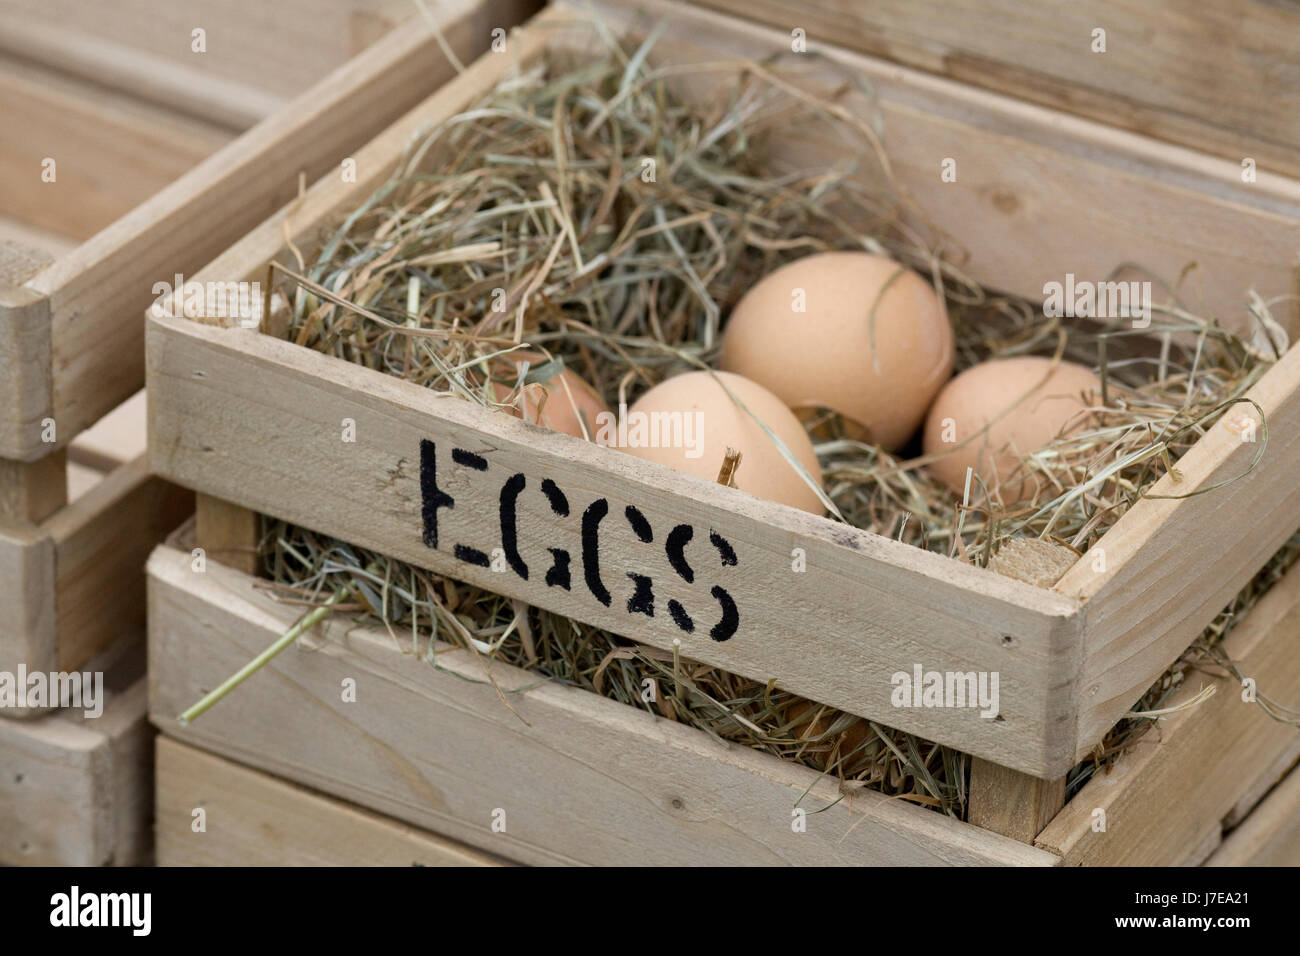 Eggs in a crate protected by Hay Stock Photo